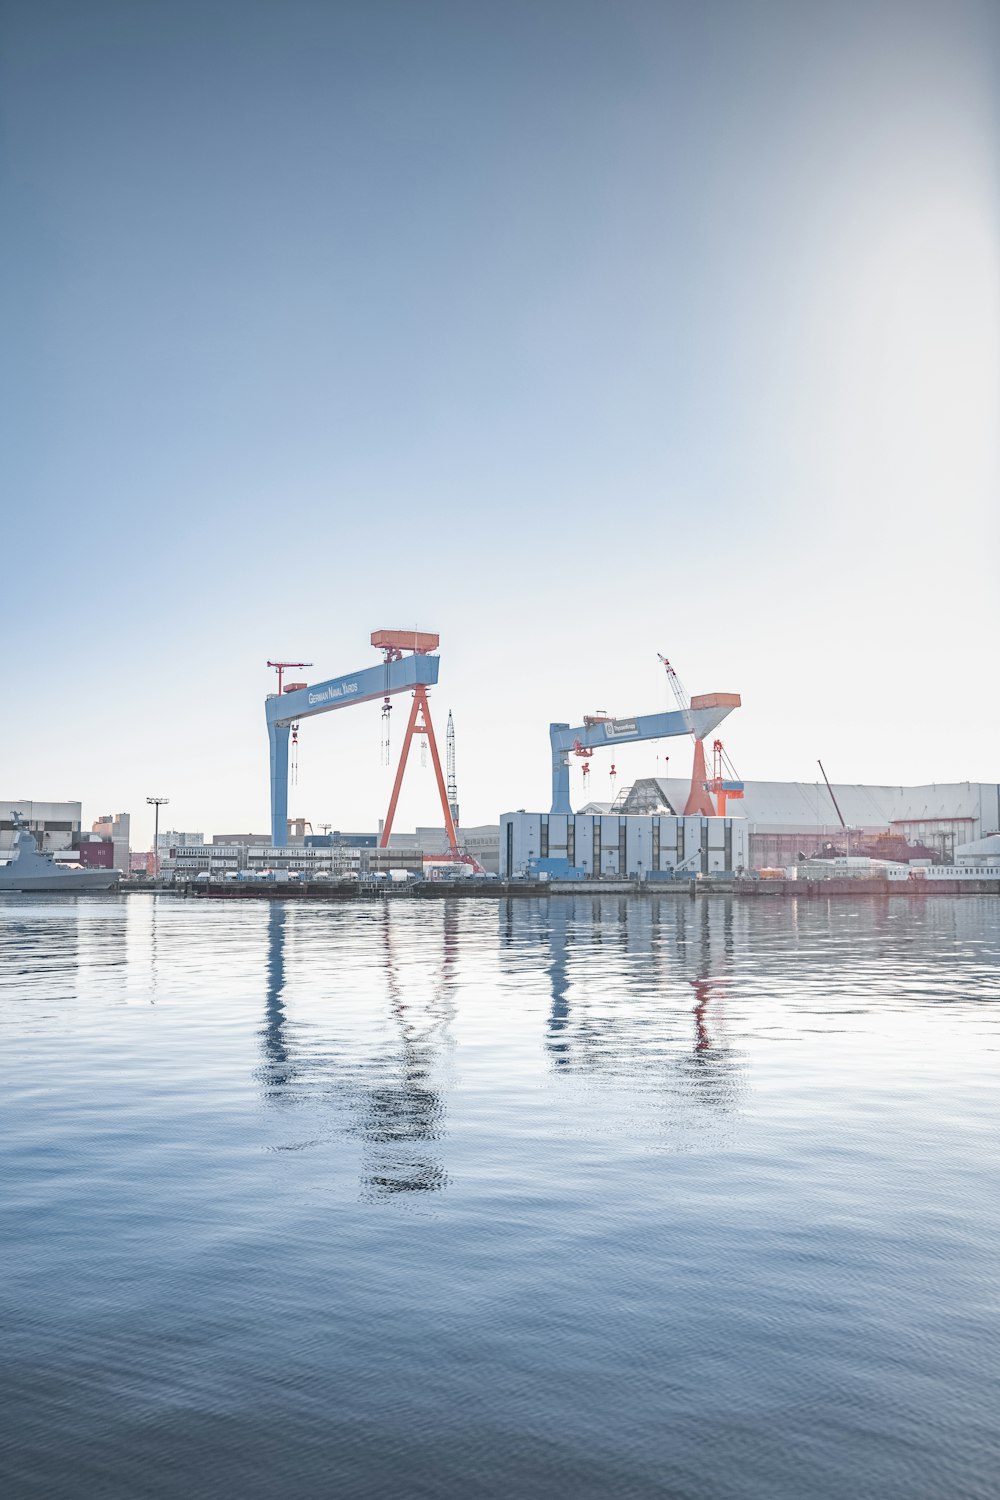 a large body of water with some cranes in the background